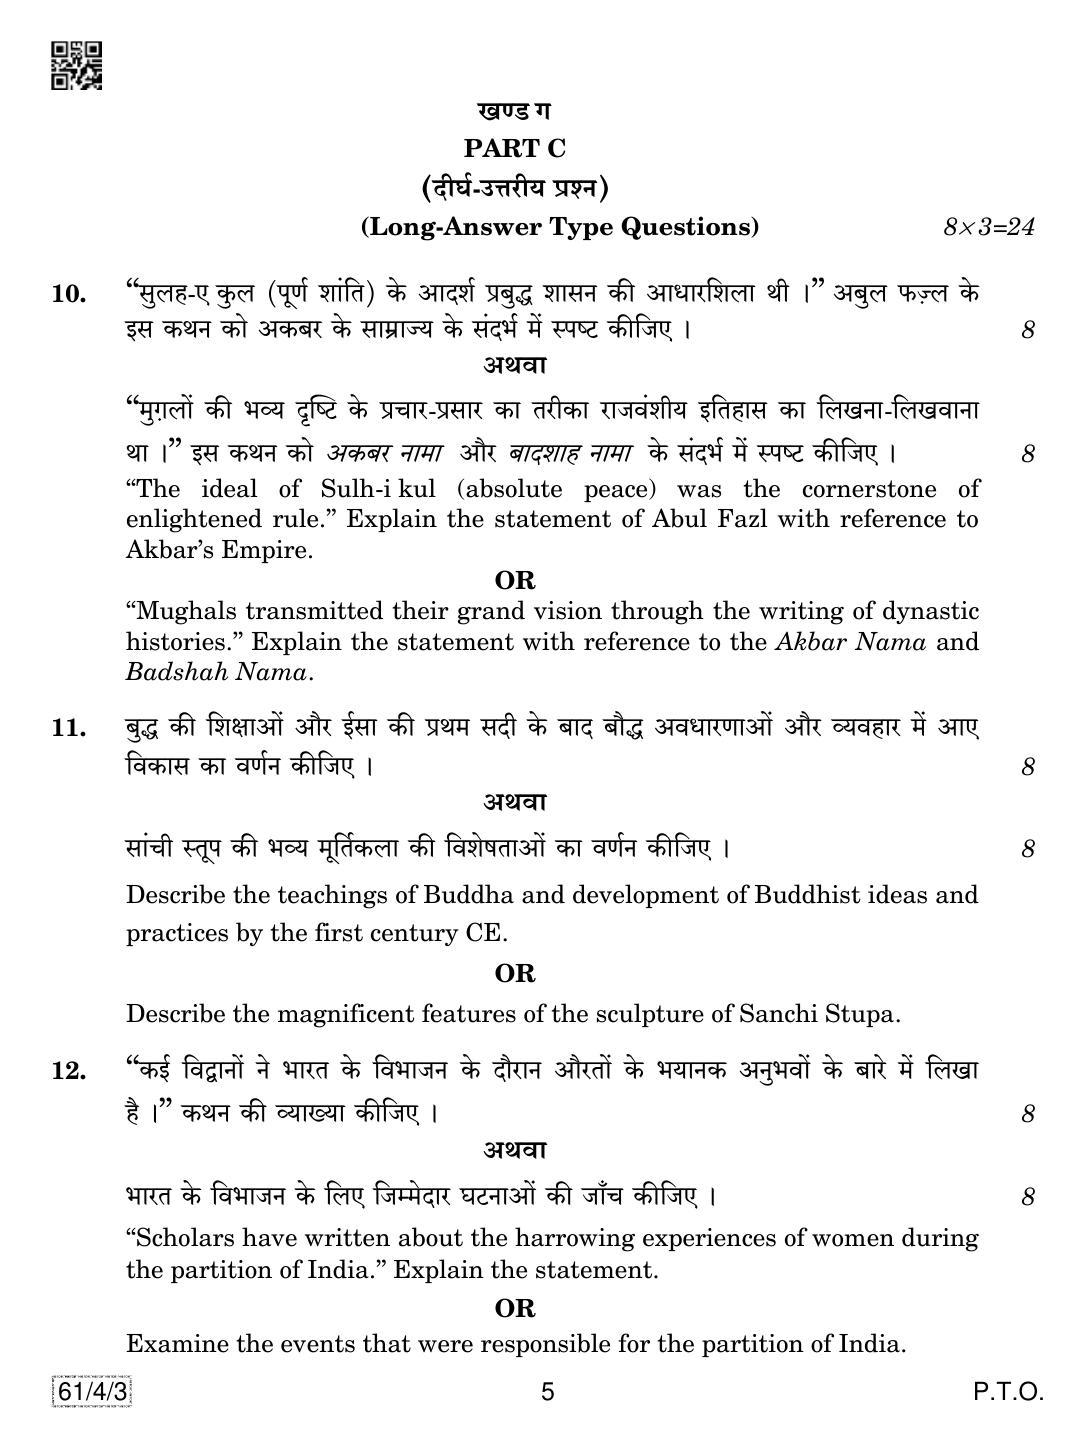 CBSE Class 12 61-4-3 History 2019 Question Paper - Page 5